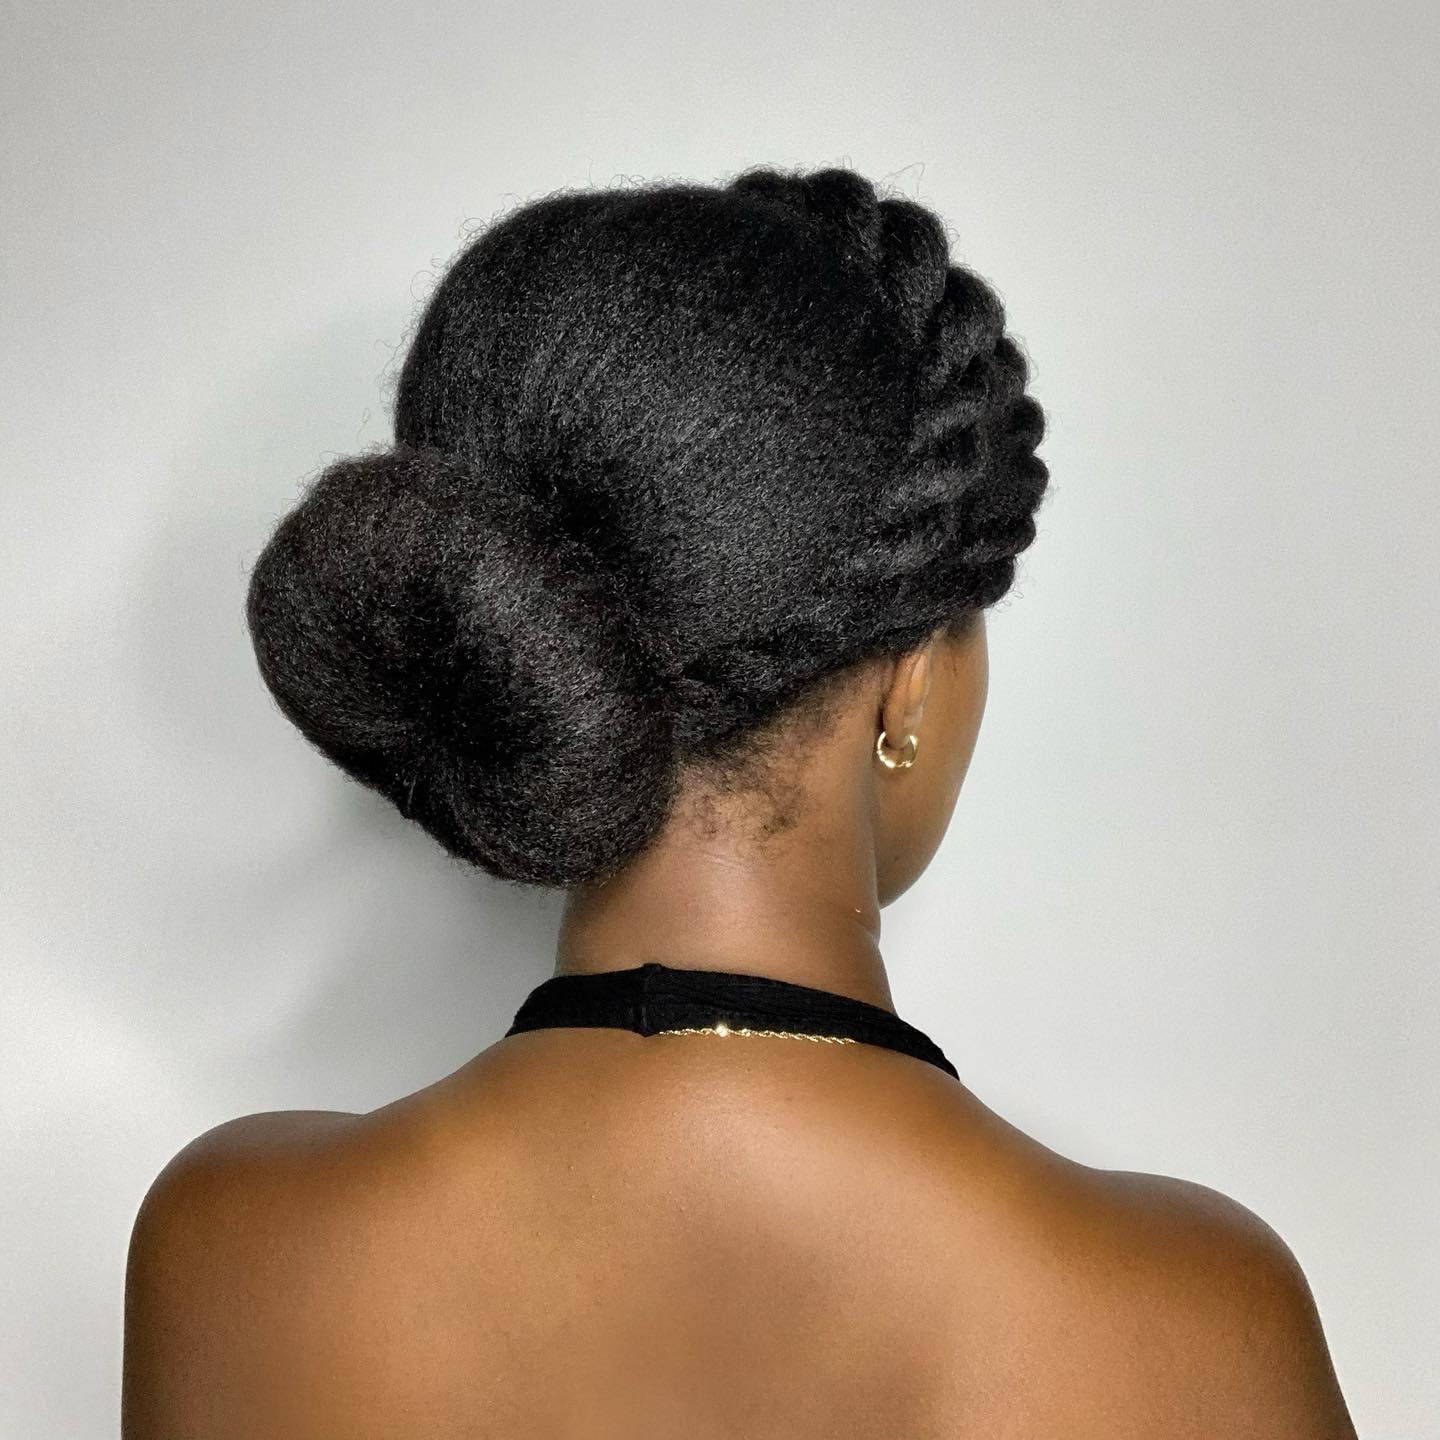 Rope Twists with a Low Updo